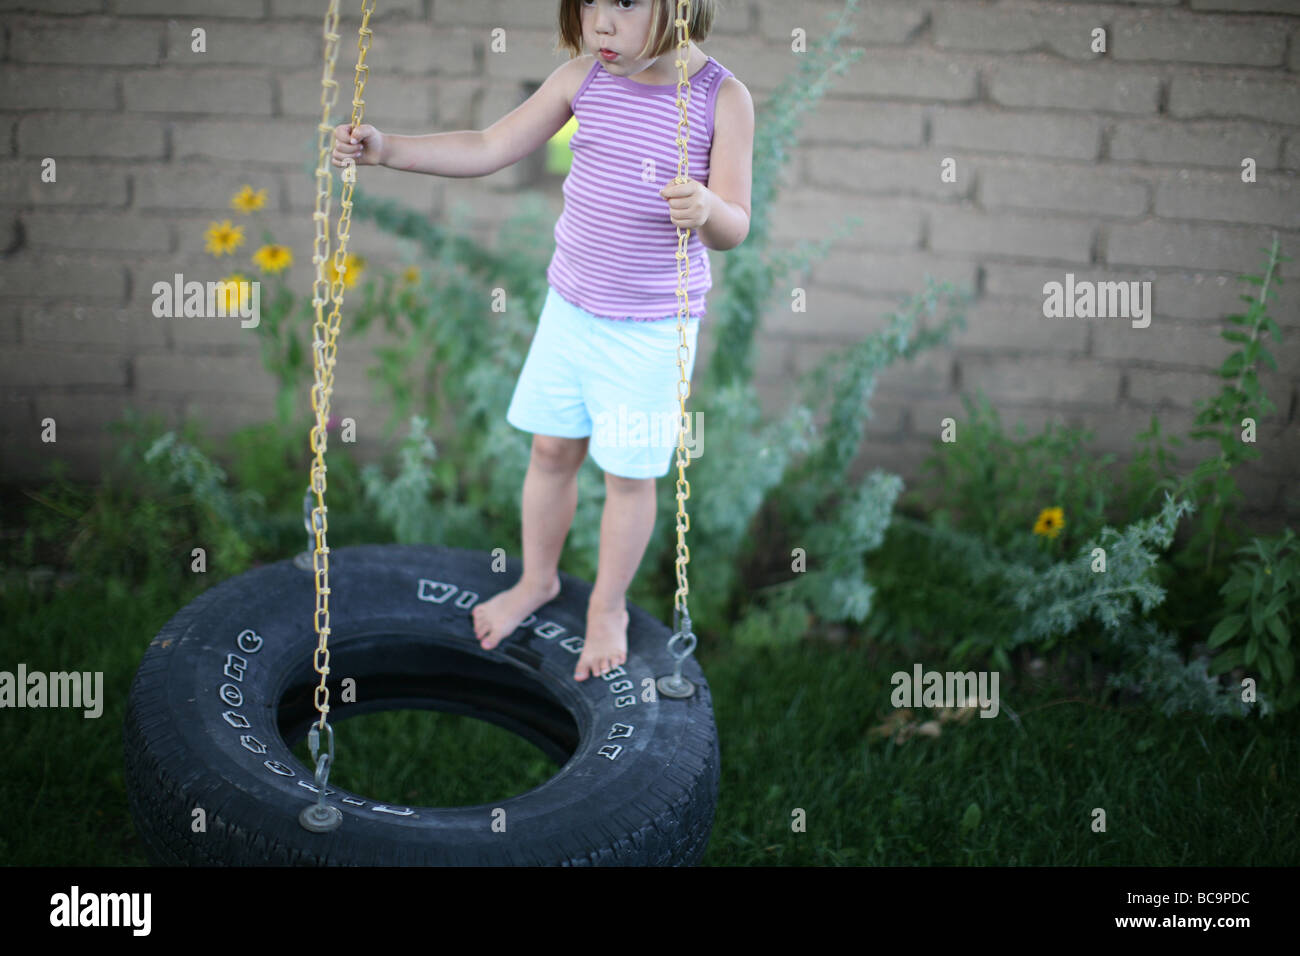 Young girl standing on tire swing Stock Photo